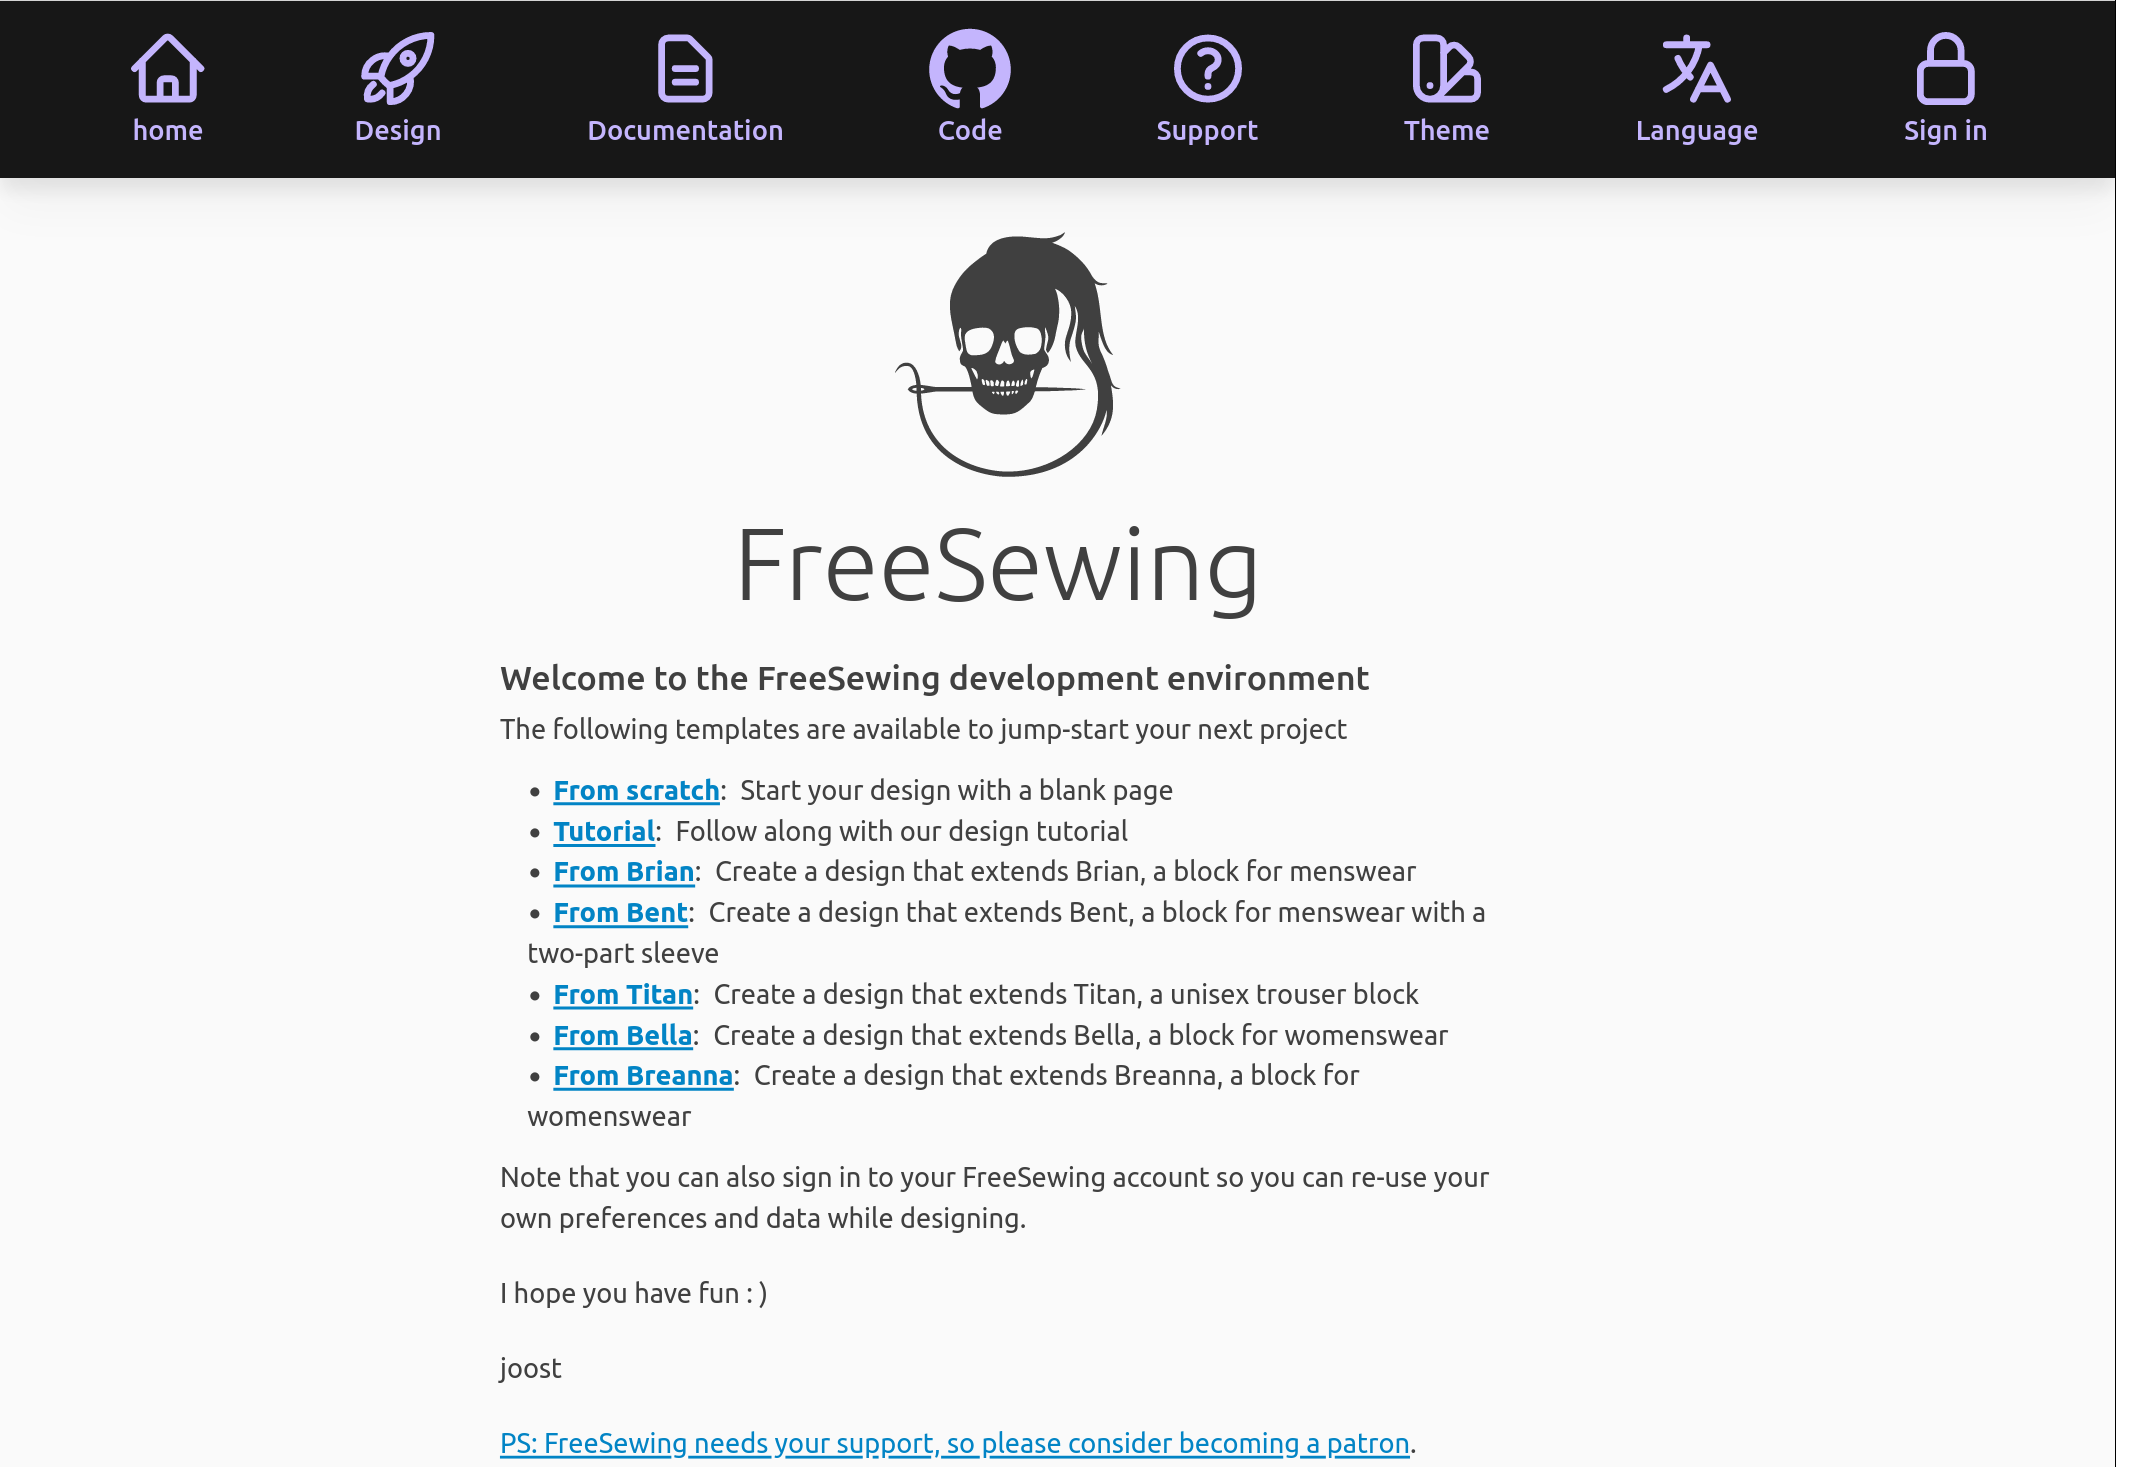 The FreeSewing development environment